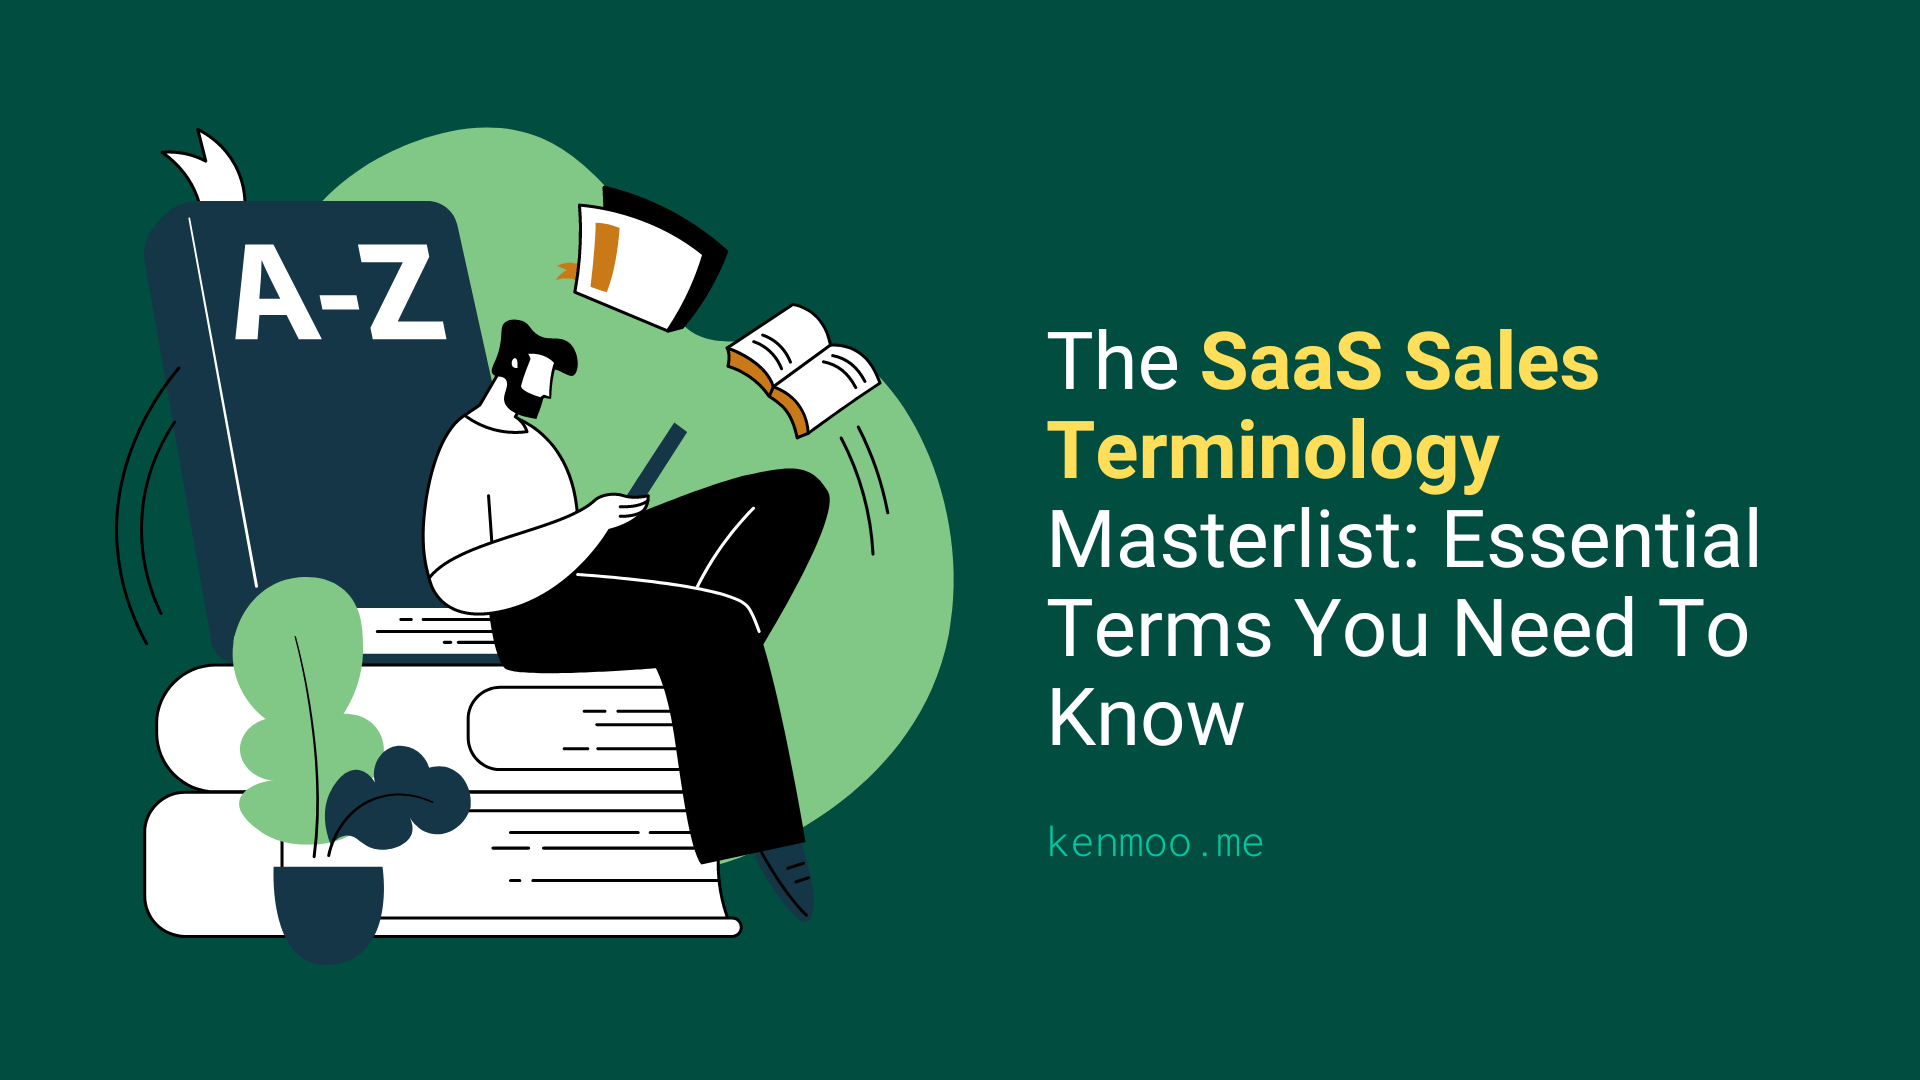 The SaaS Sales Terminology Masterlist: Essential Terms You Need To Know